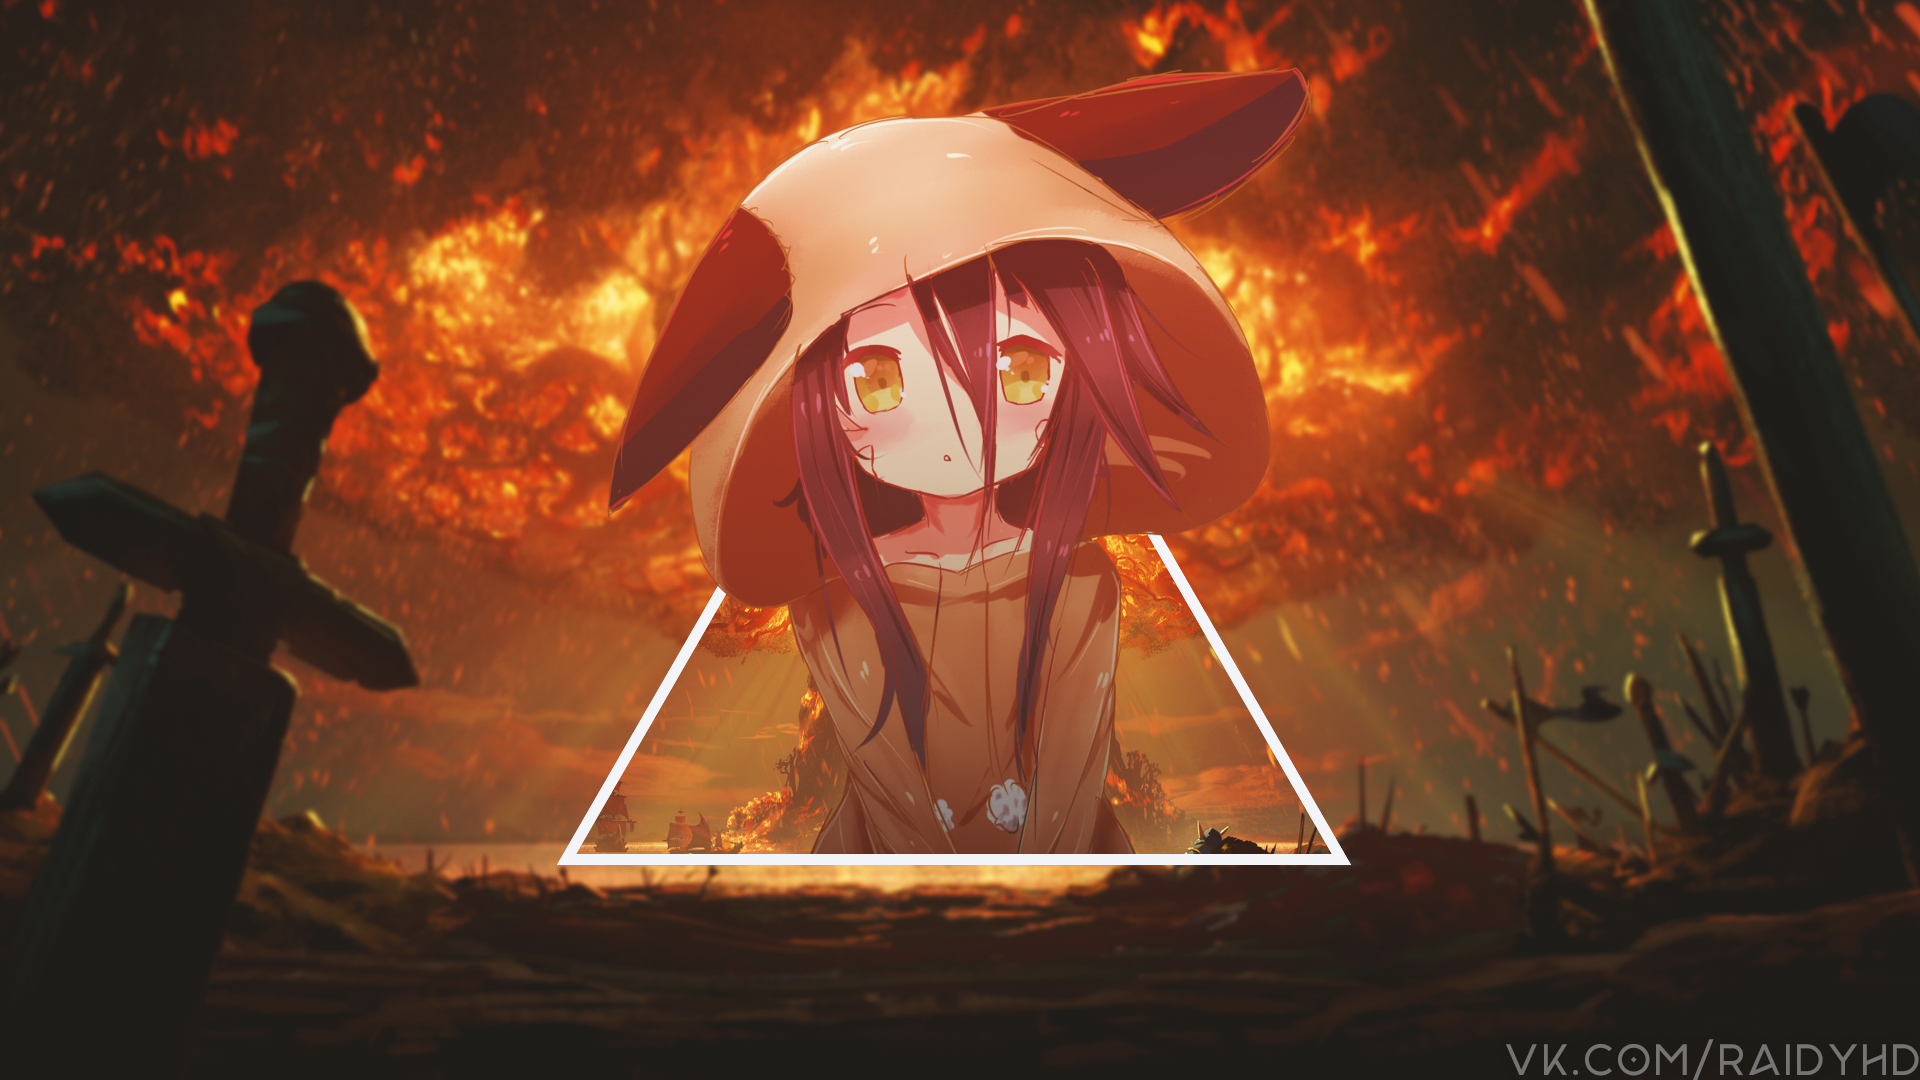 No Game No Life Picture In Picture 1920x1080